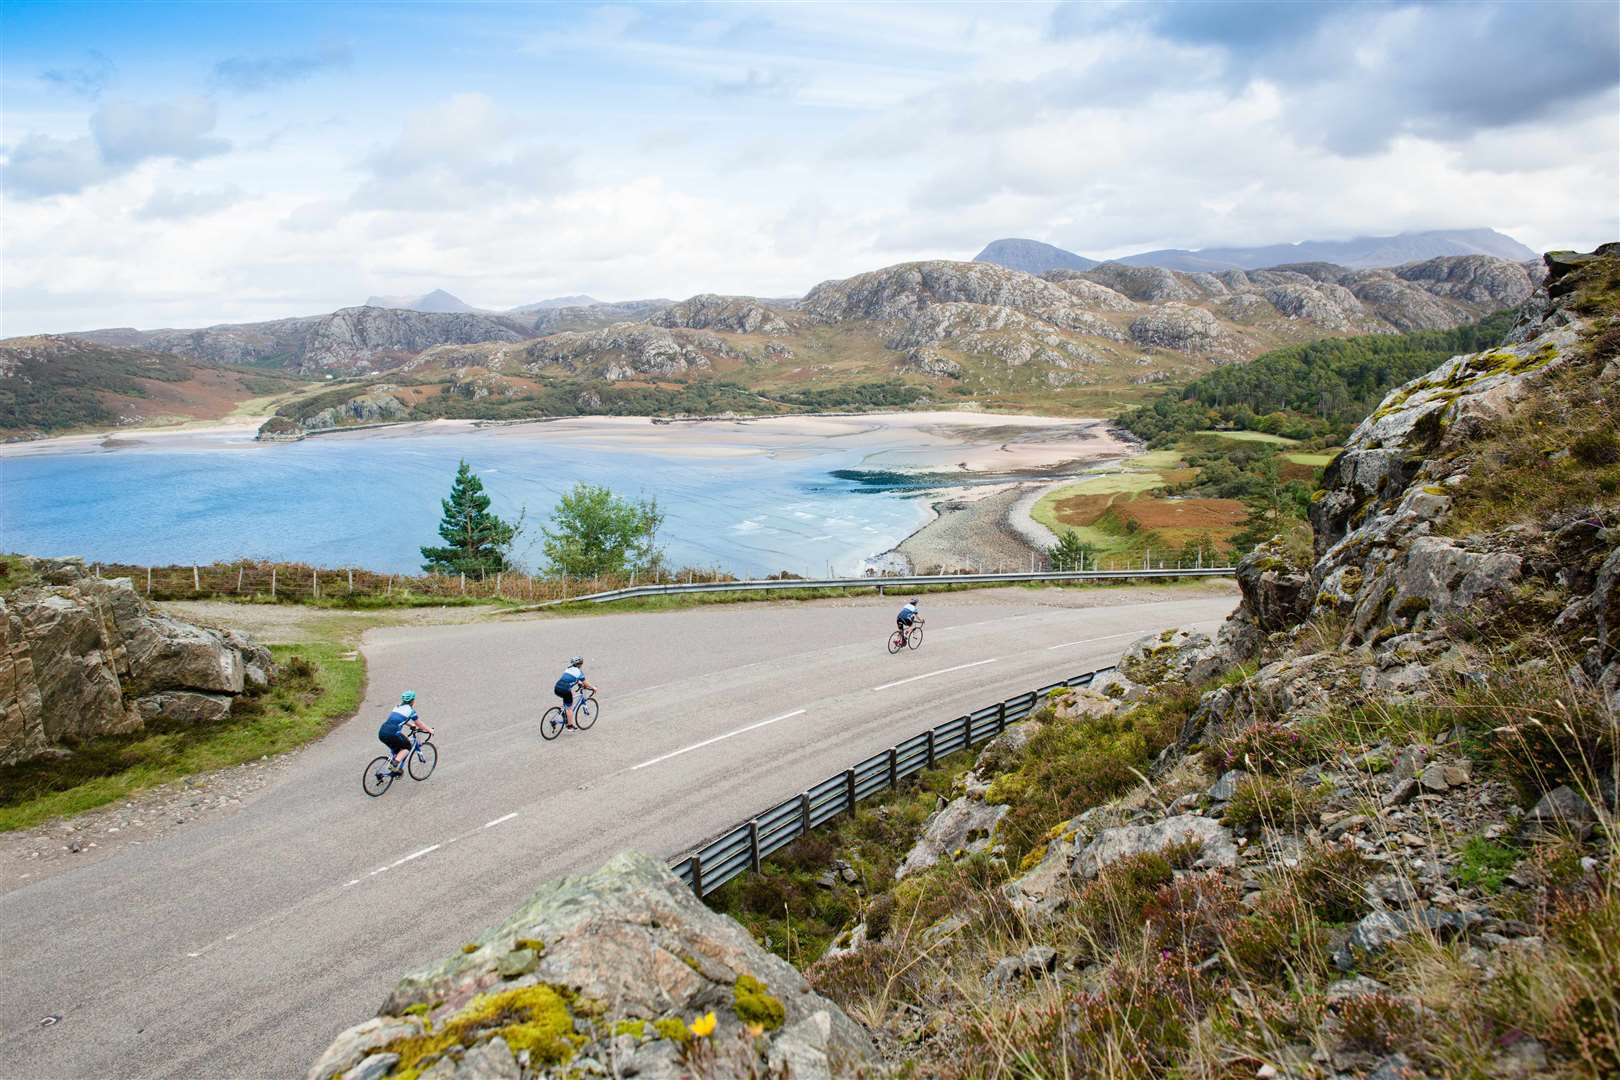 Wilderness Scotland is offering three cycing trips of varying length and difficulty on the North Coast 500.